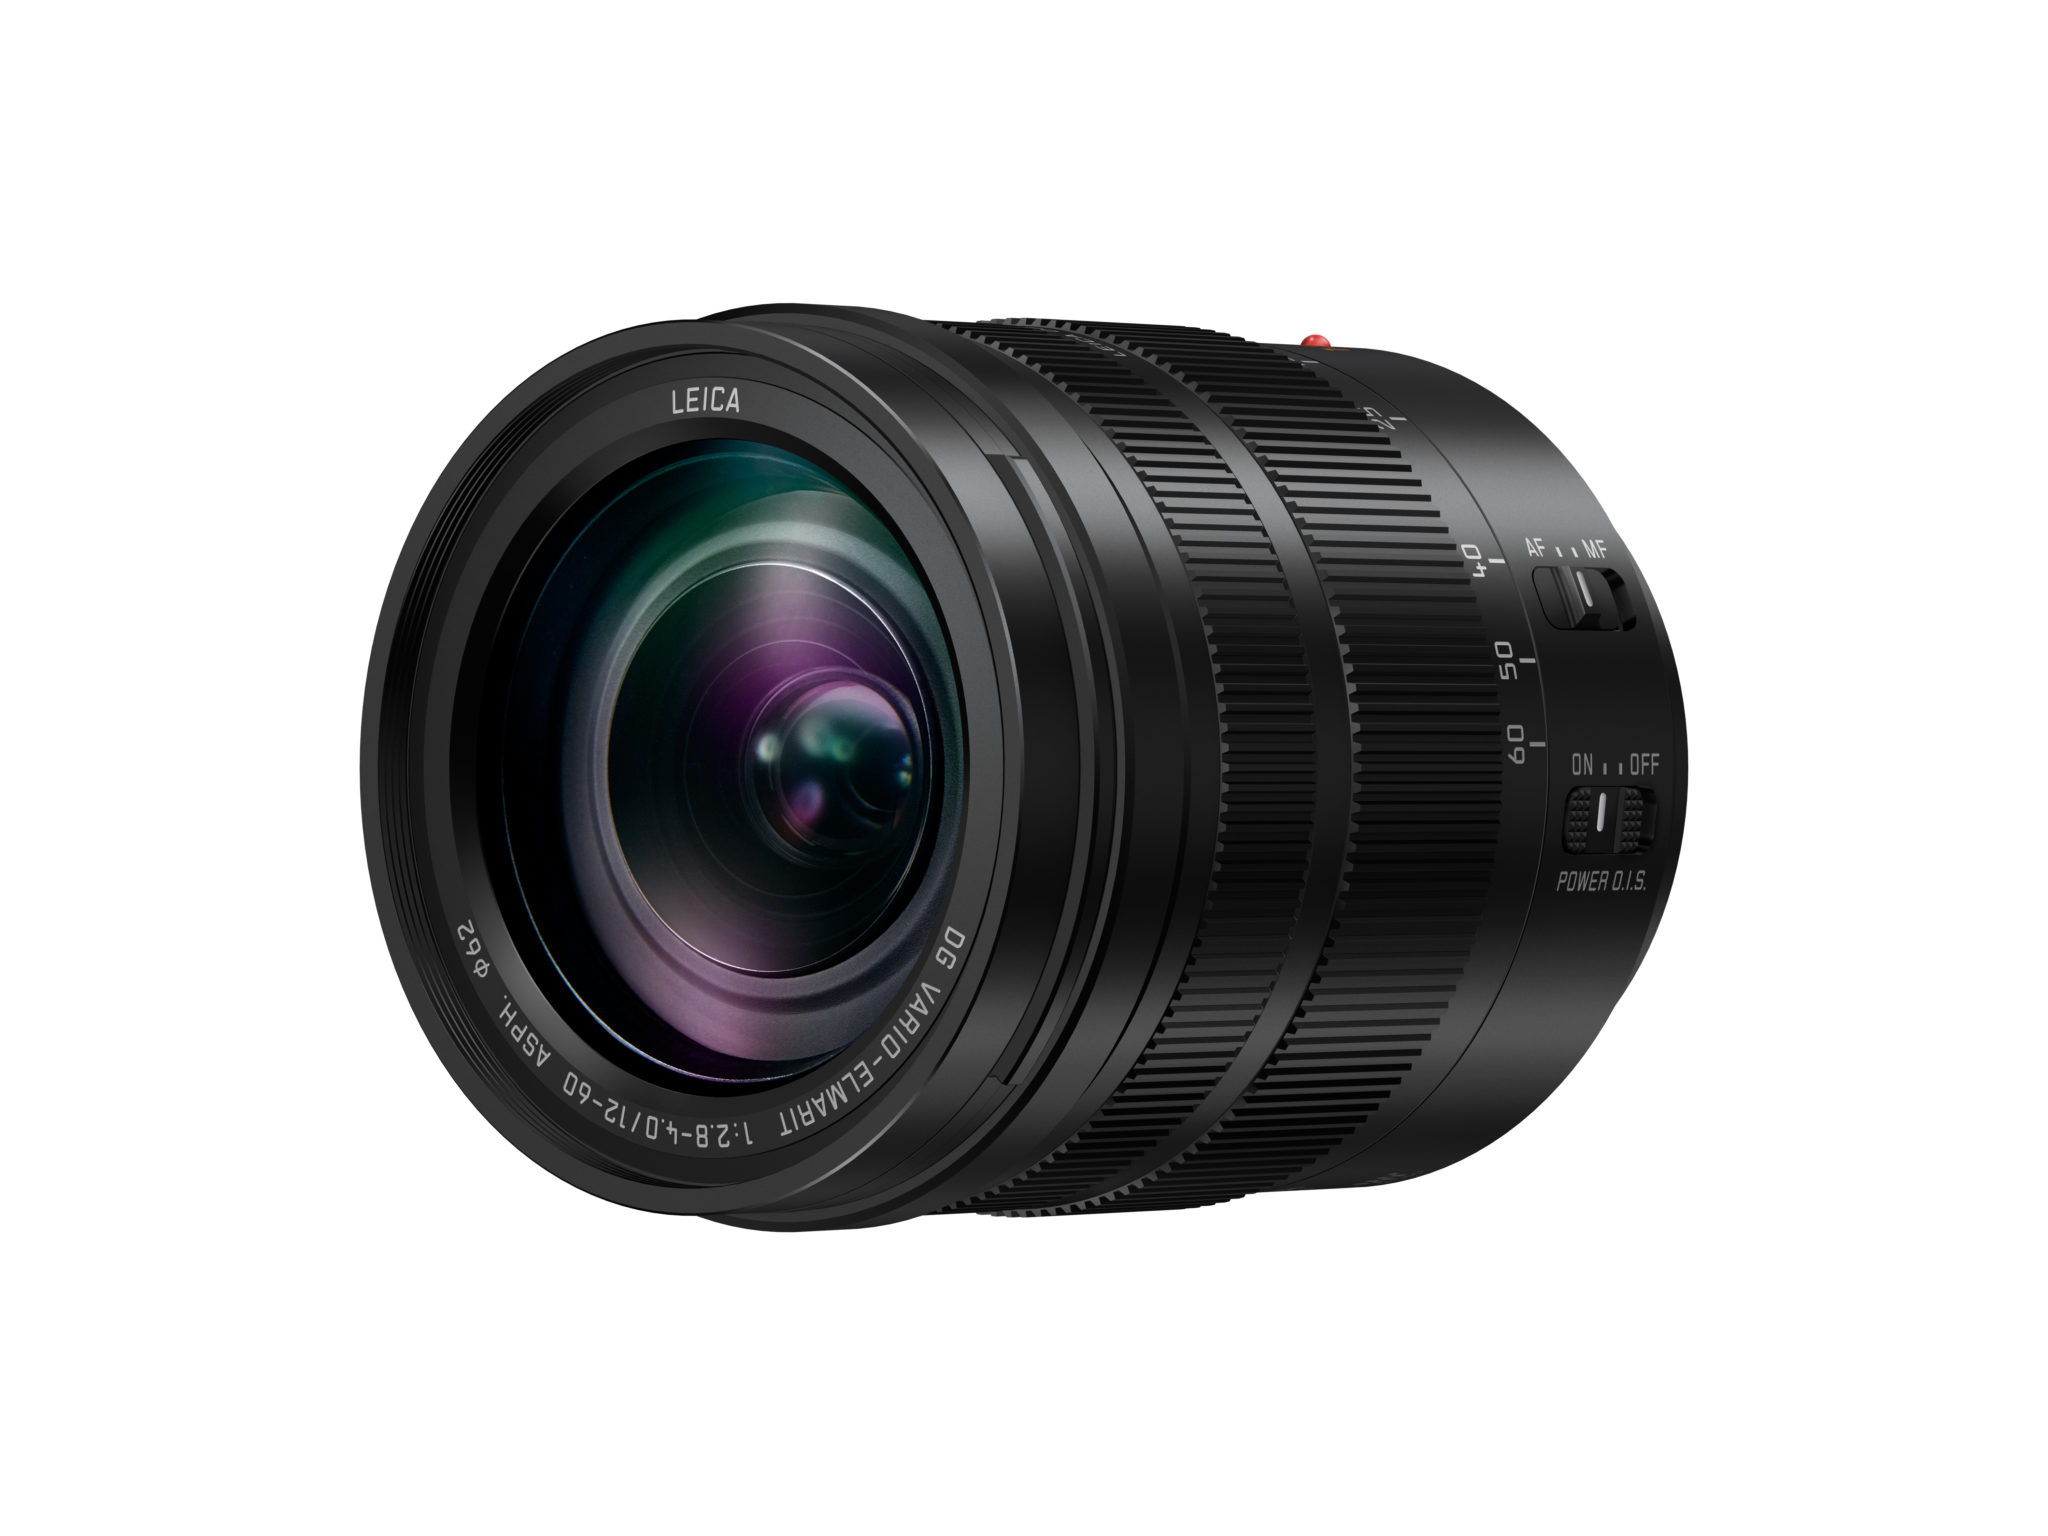 Panasonic Also Announces New 12-60mm F2.8-4 Power OIS, and More